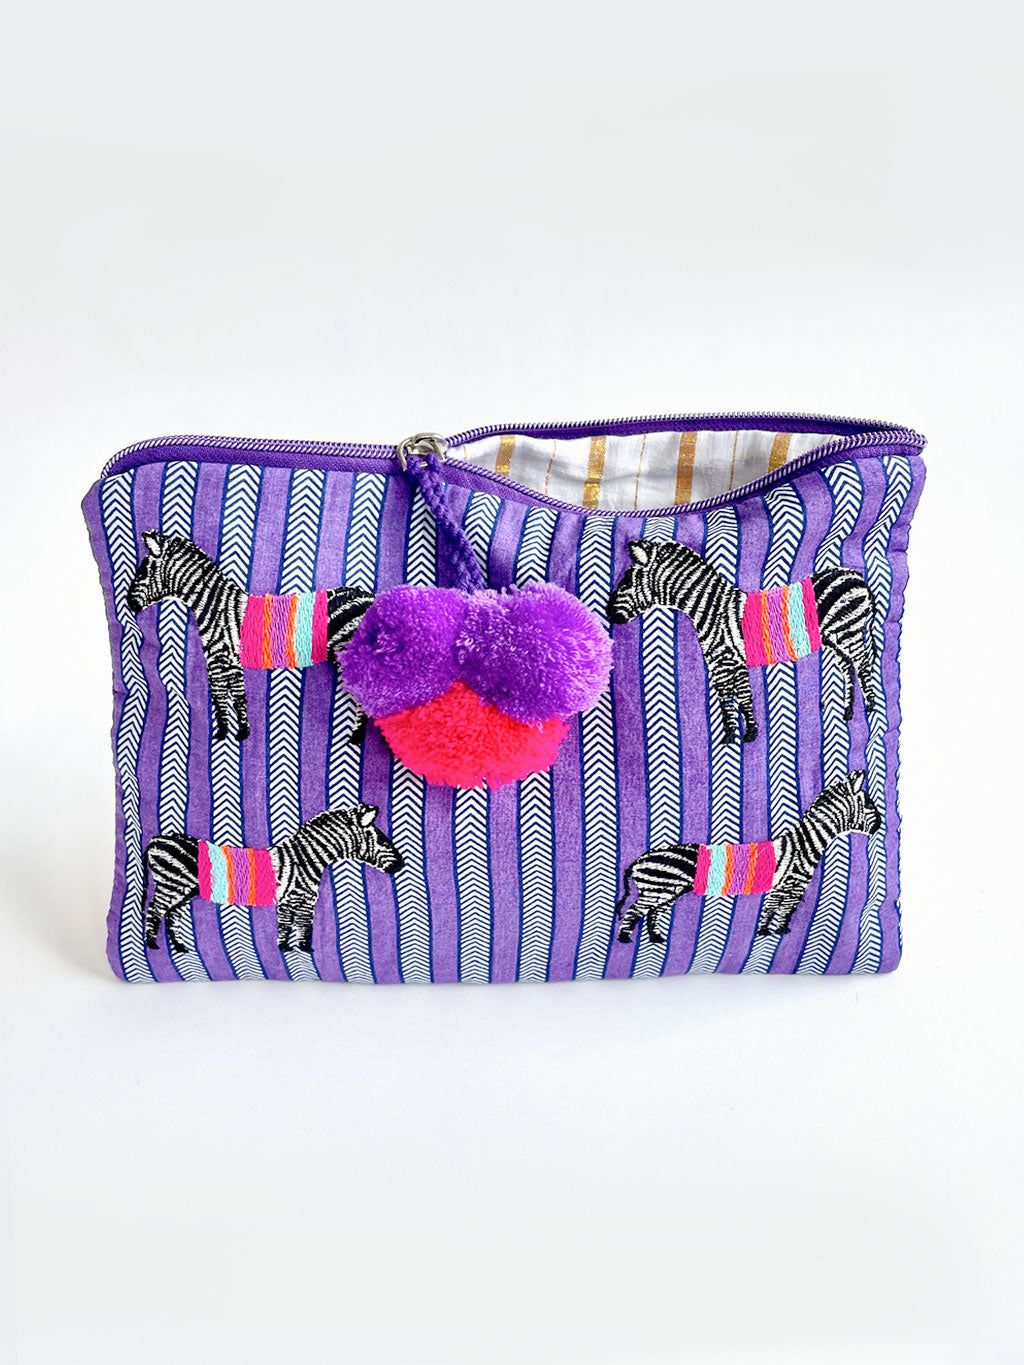 Nimo with Love Violet Striped Ortiga Bag with Zebra Embroidery